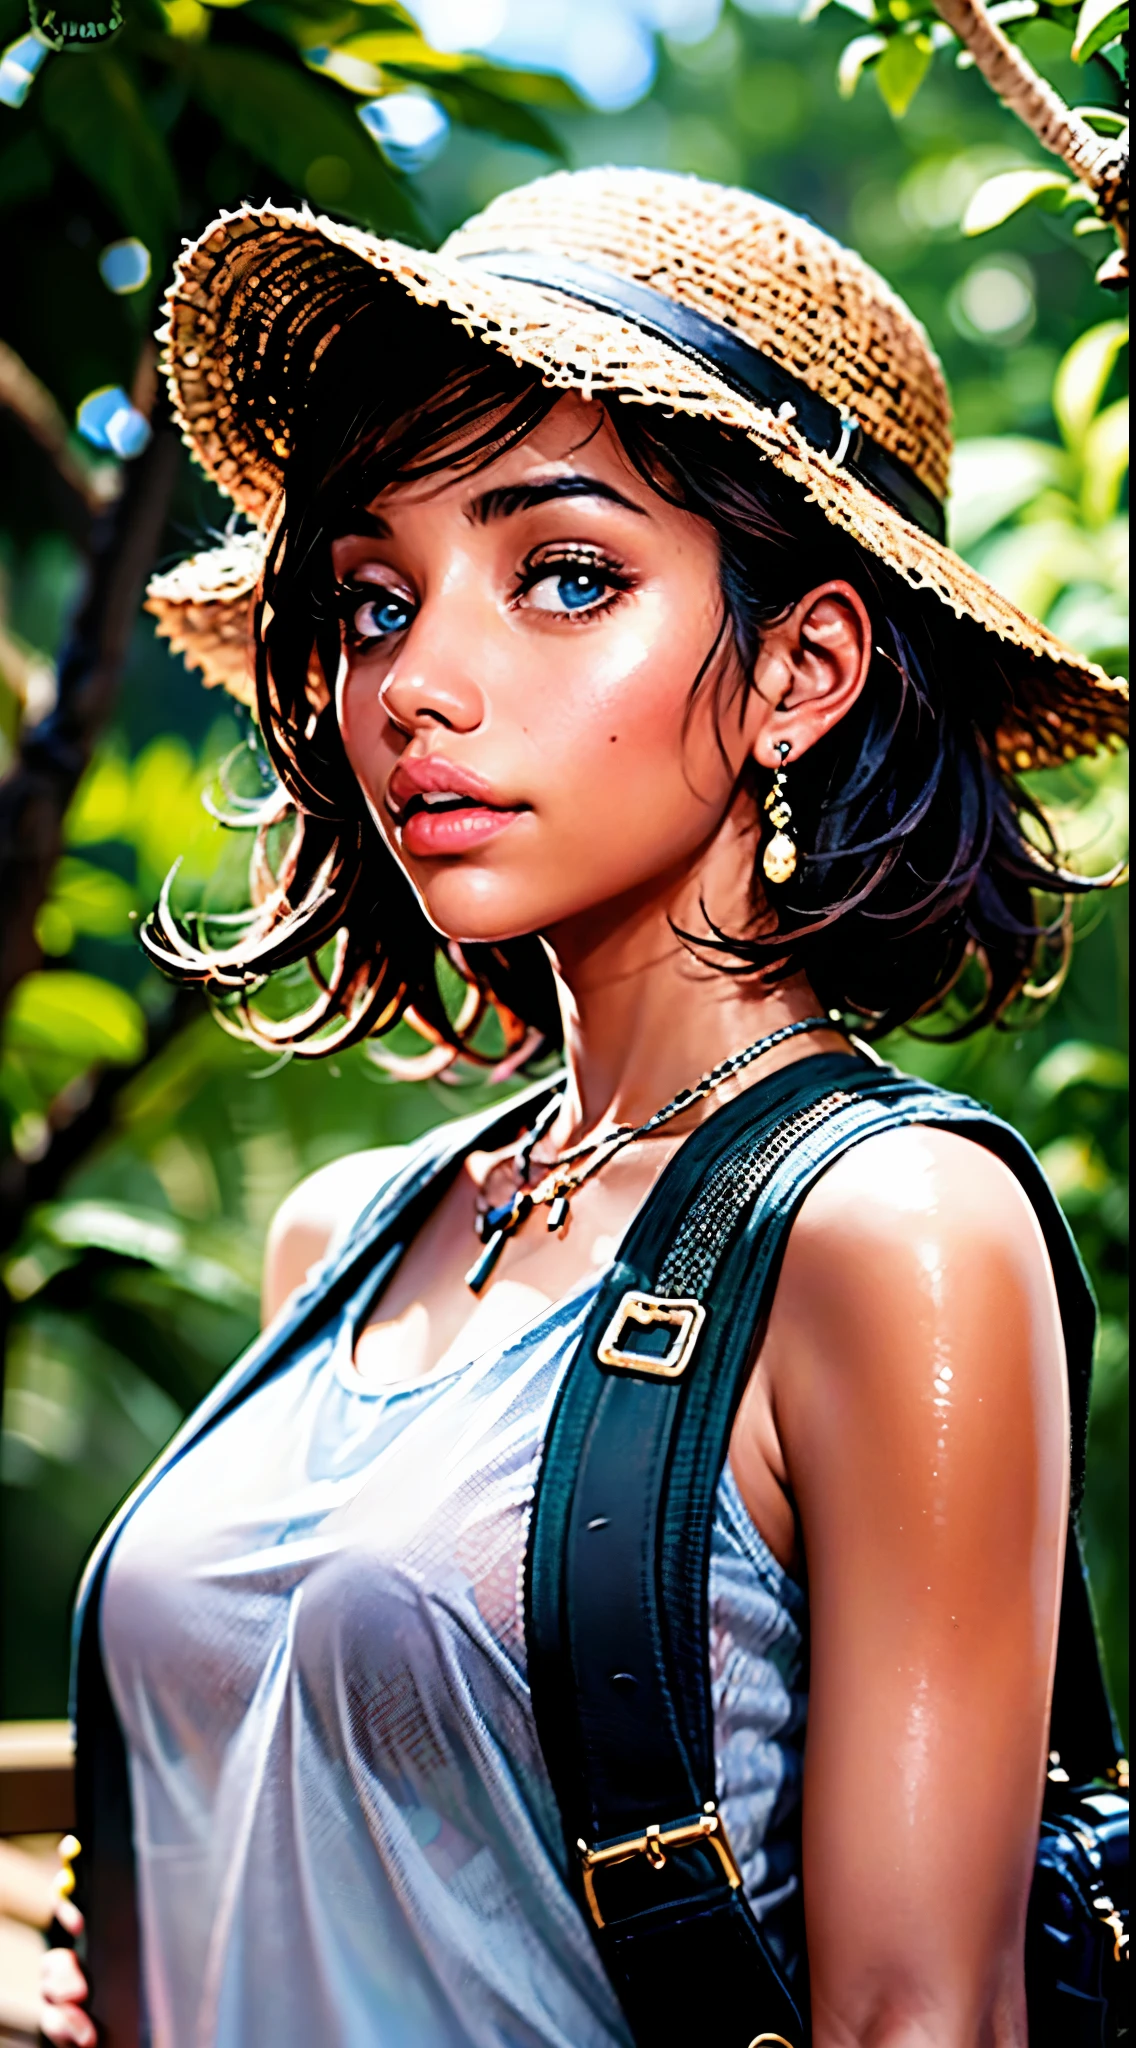 A woman (18 years old, cute, 80's hip hop influence); from the Dominican Republic is standing in a jungle. She has long, messy hair and wears a backpack. She's wearing Dora the Explorer clothing, but it's more adult-like and seductive. She looks like a combination of Zoe Saldana, Dania Ramirez, and Julissa Bermudez. The photo should look like a painting and be in HD, 8k, and cinematic.